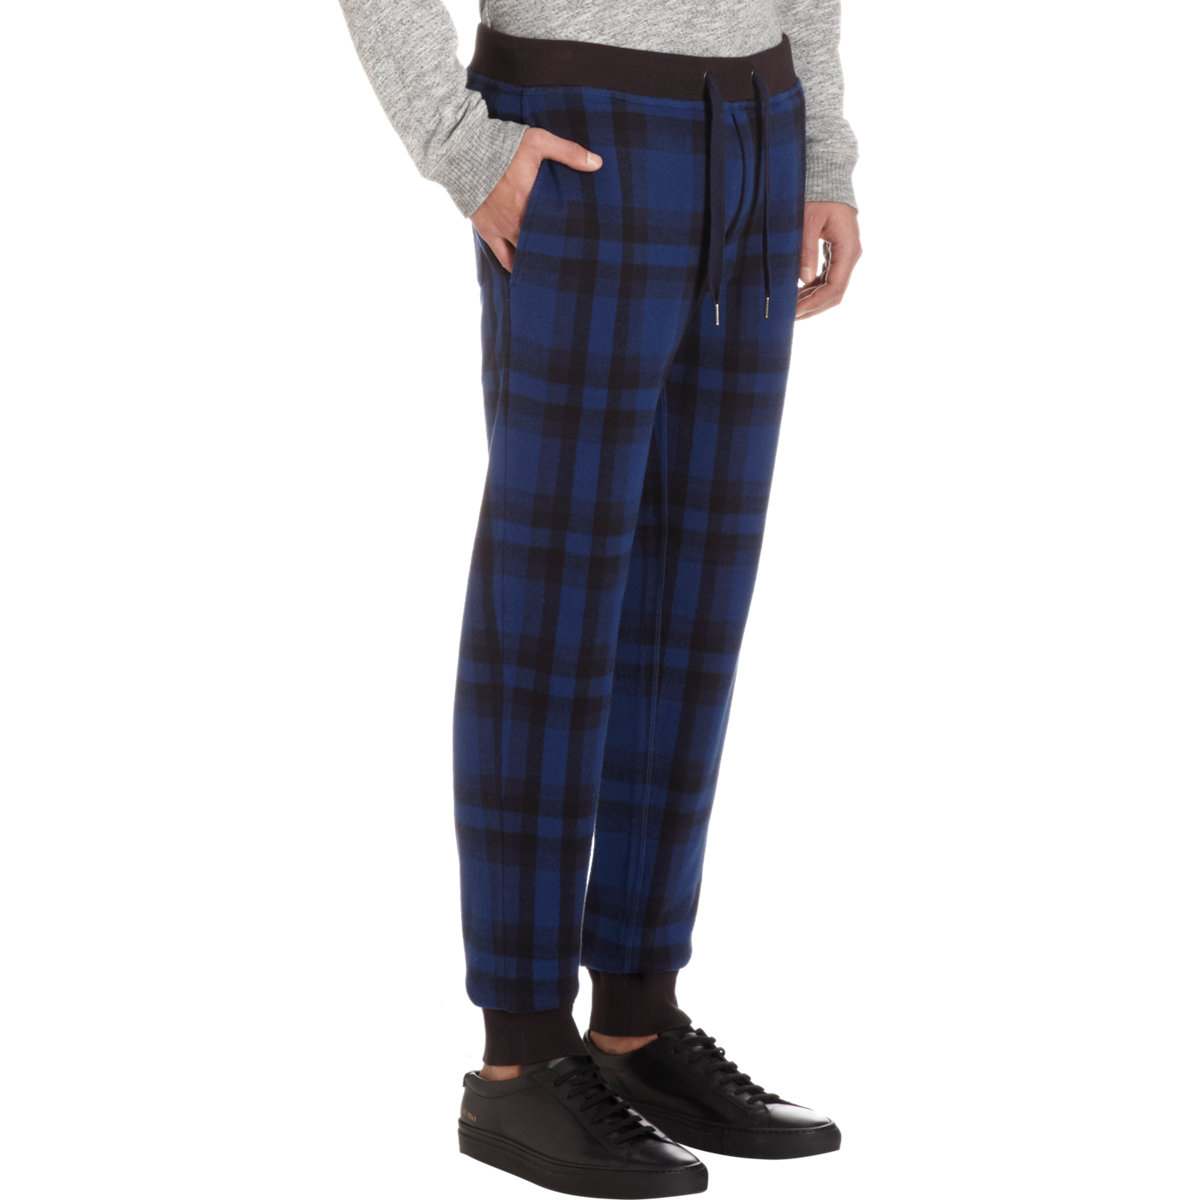 Lyst - Marc By Marc Jacobs Plaid Lounge Pants in Blue for Men